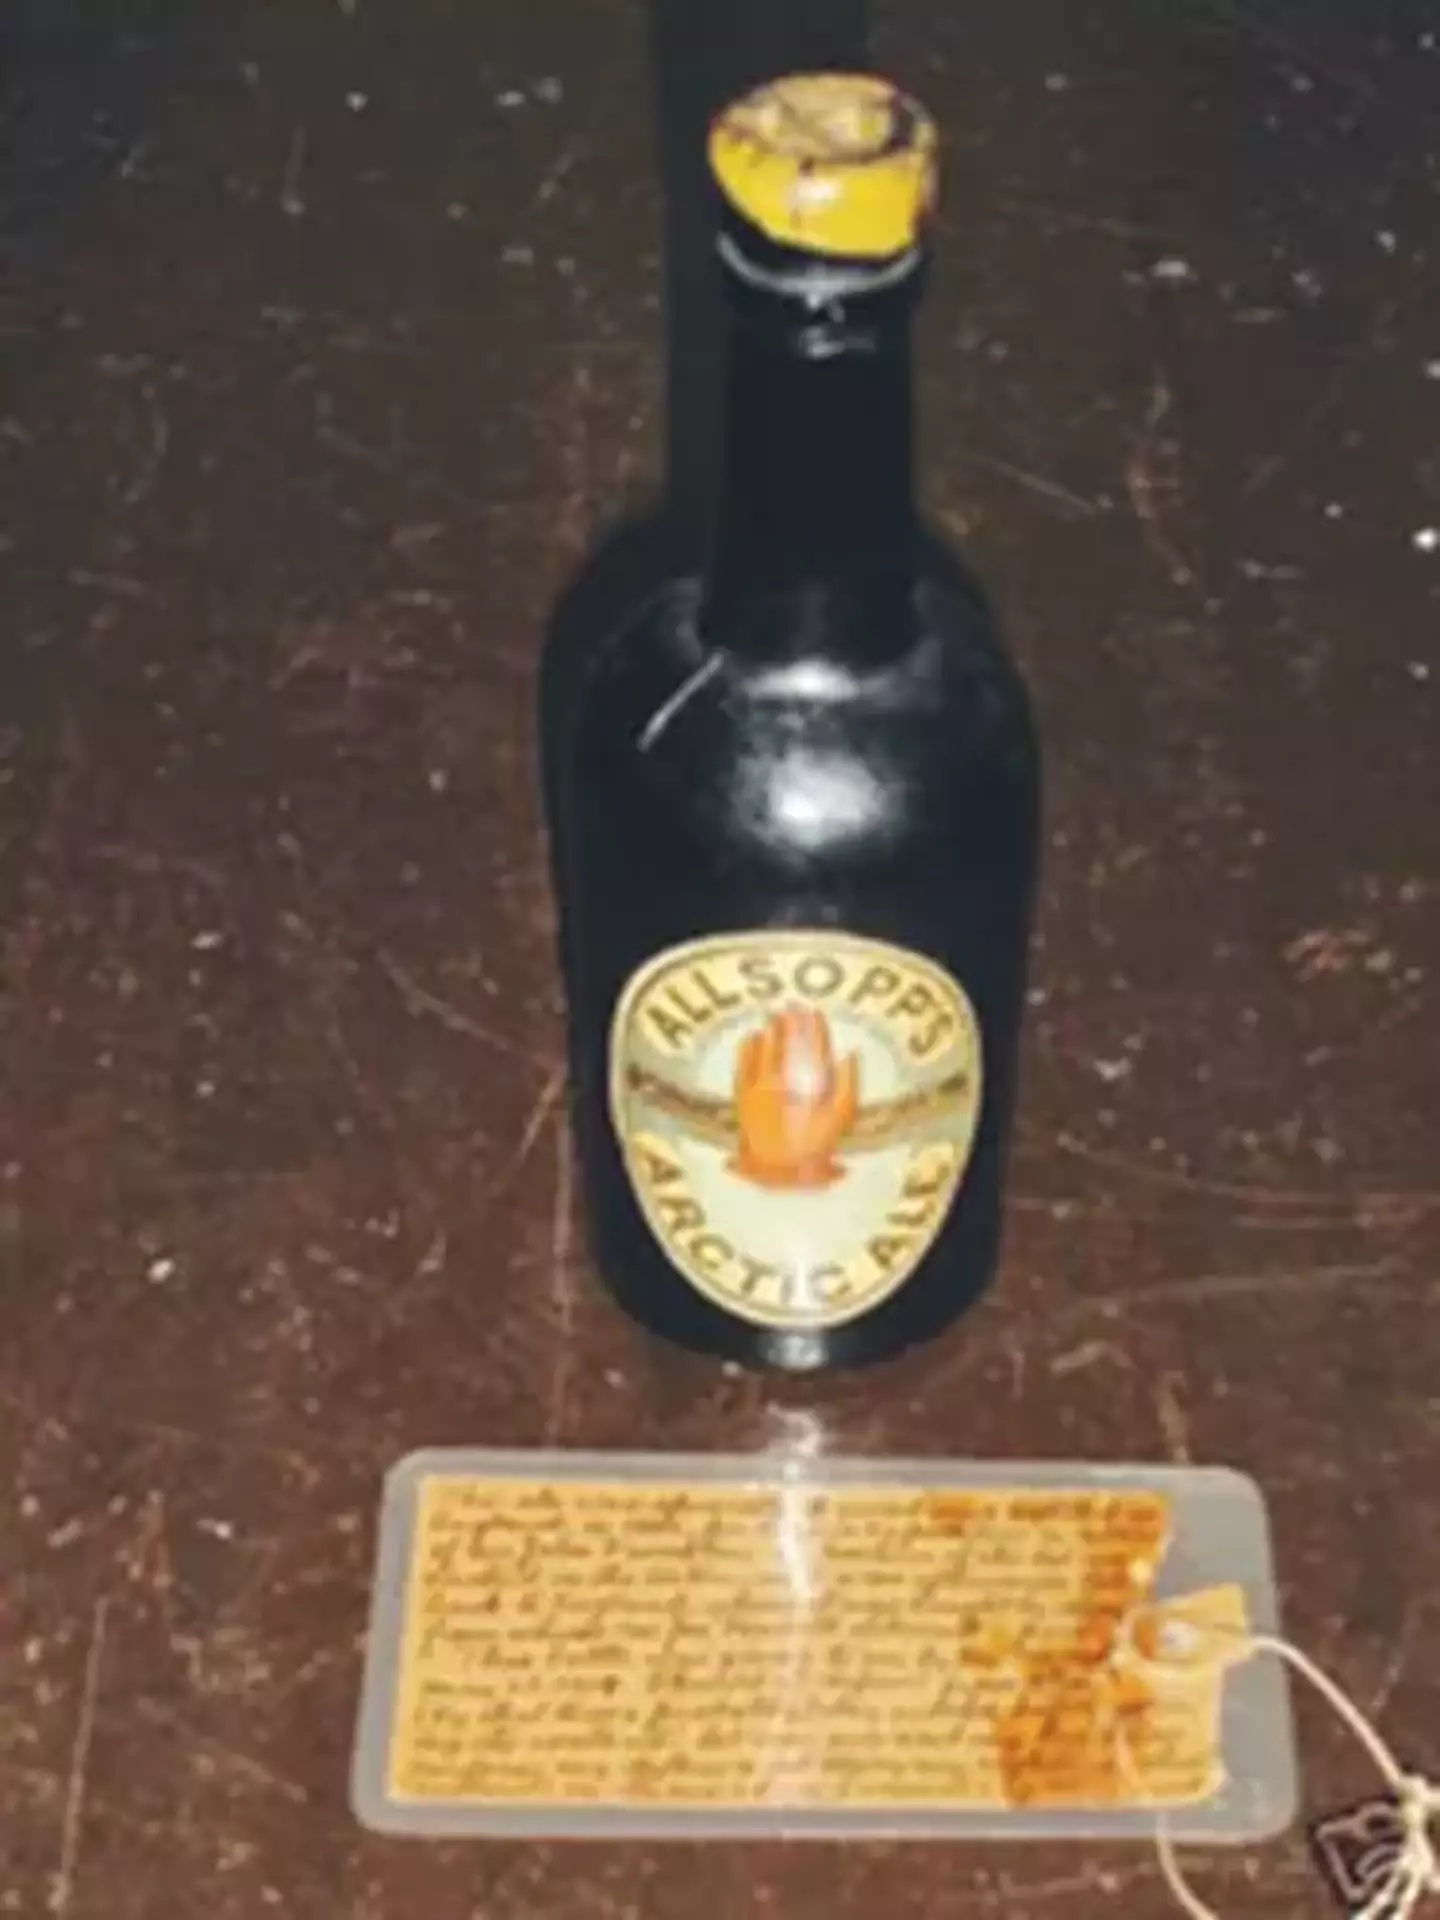 The bottle of Allsopp's Arctic Ale, which sold for $503,300.